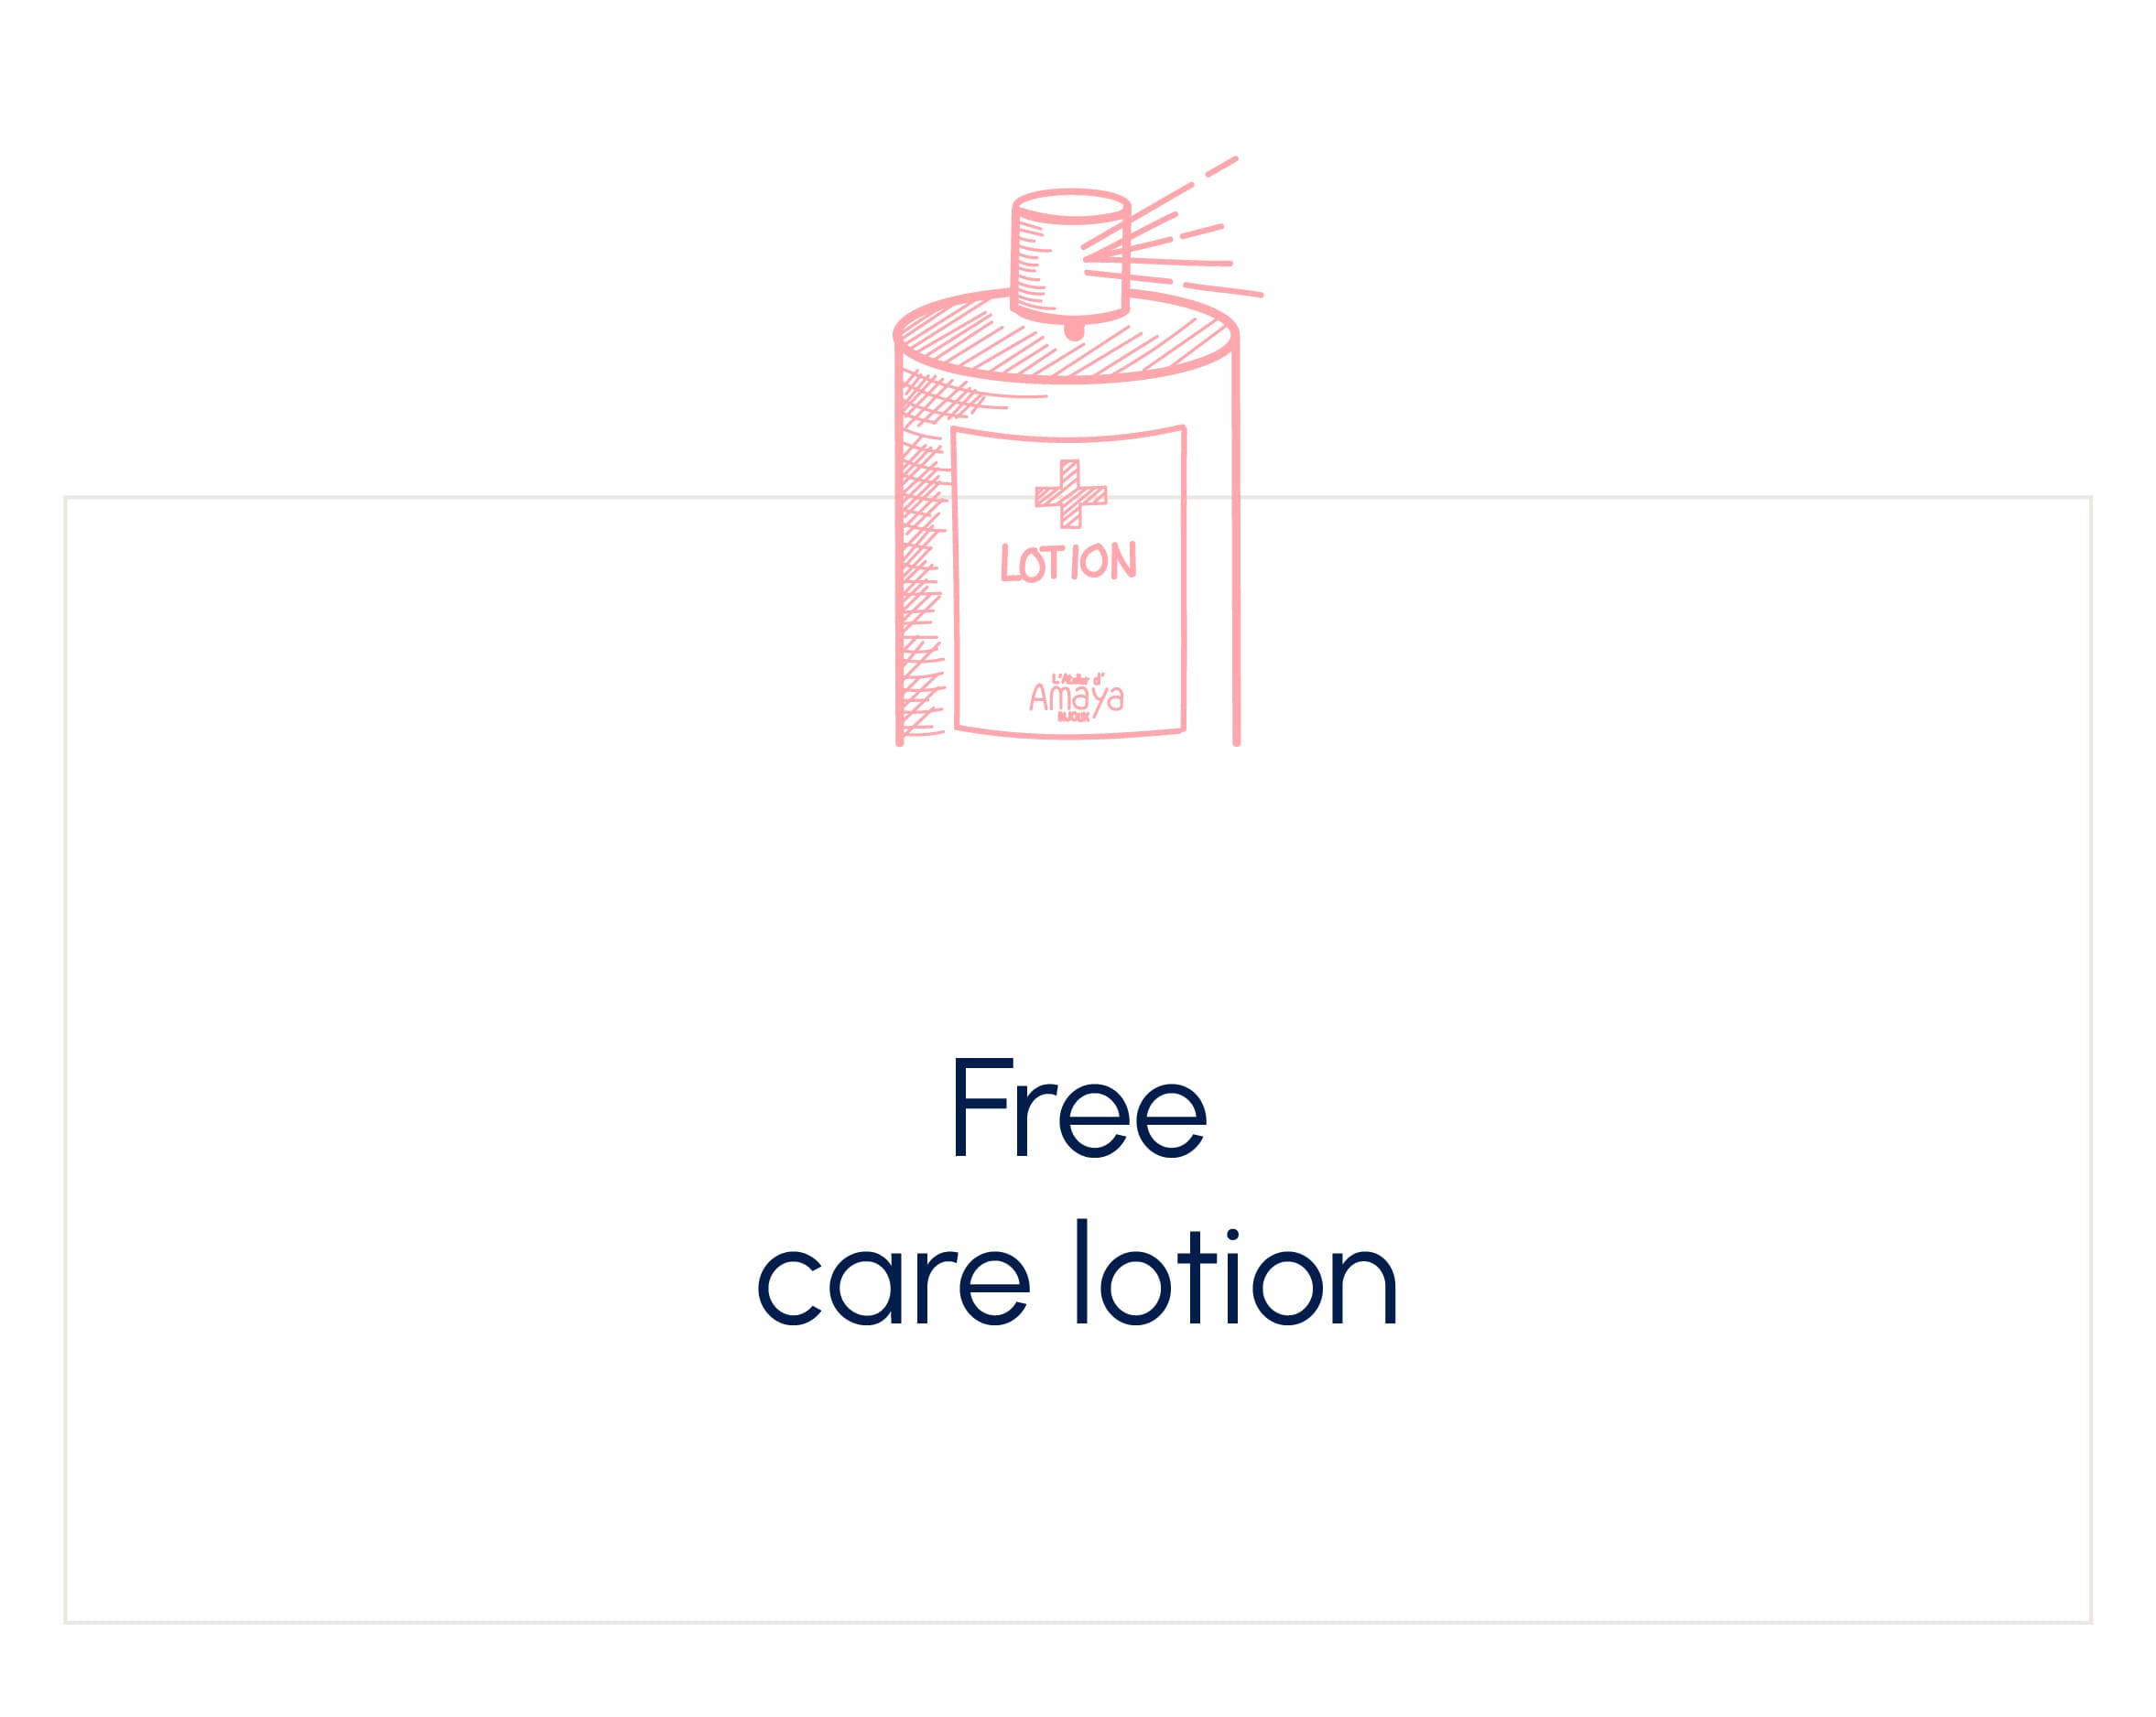 Free care lotion